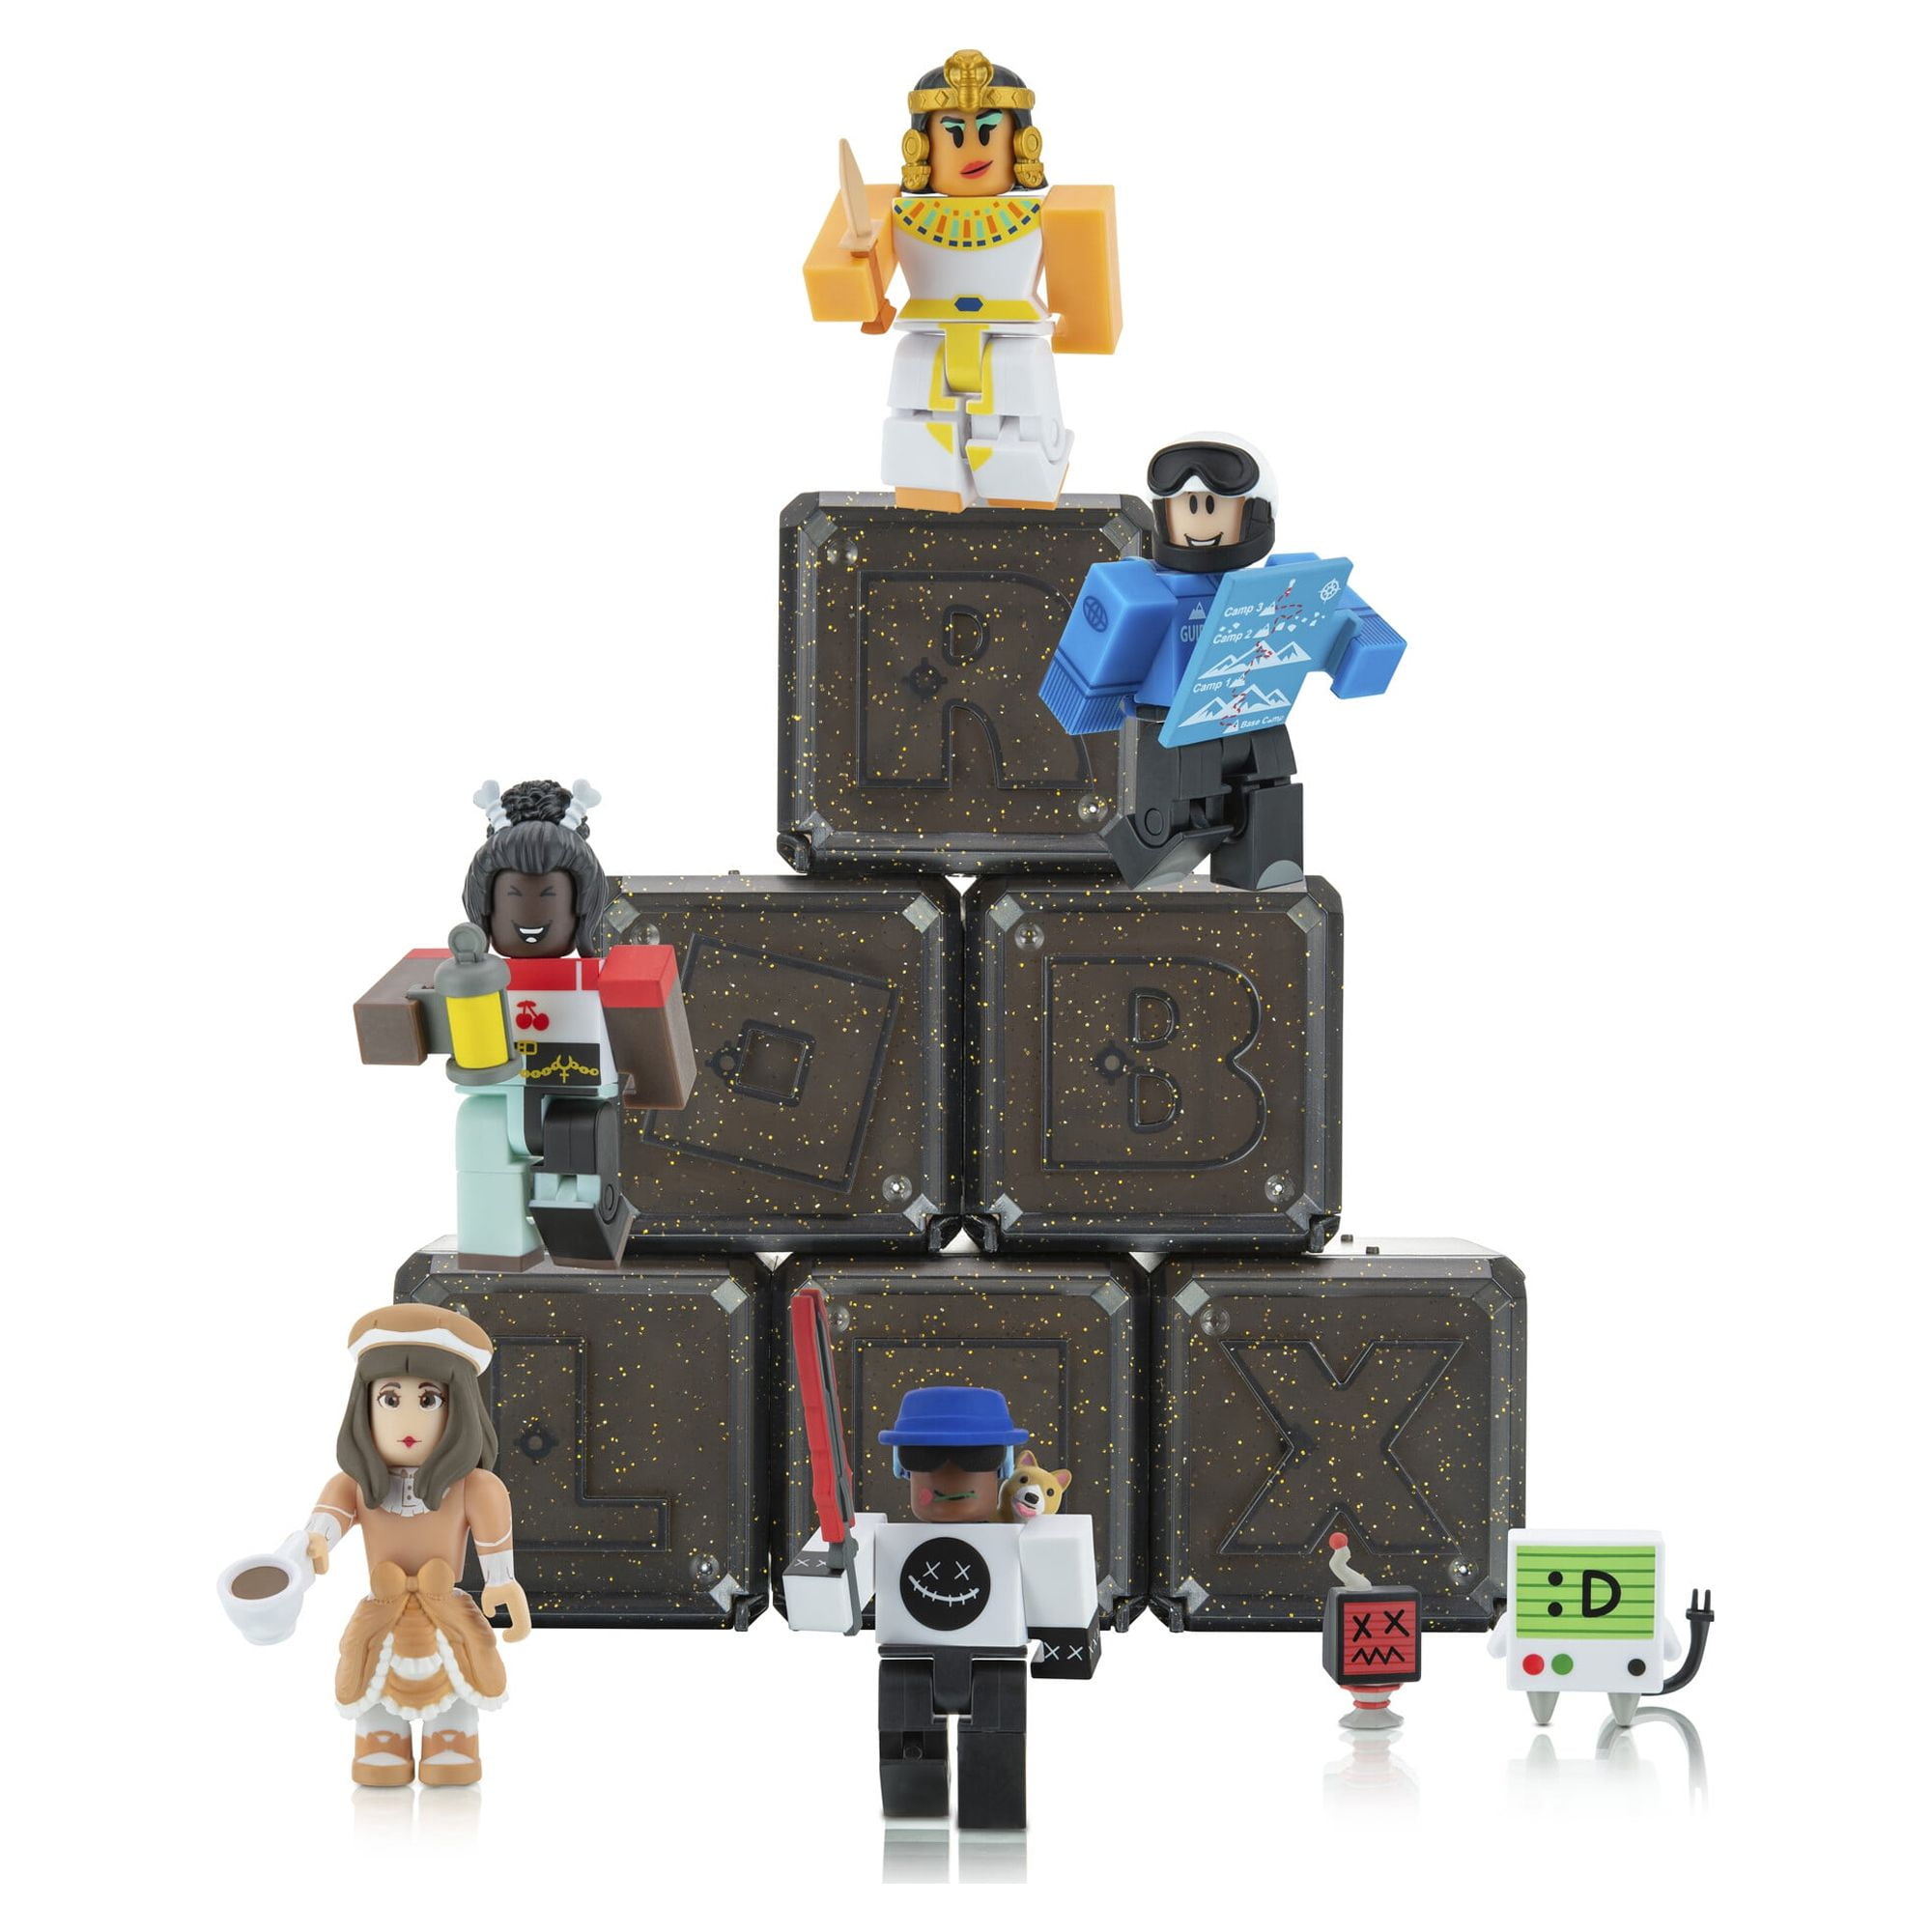 Roblox Celebrity Mystery Figures Series 7 - 6 Pack [Toys, Ages 6+]